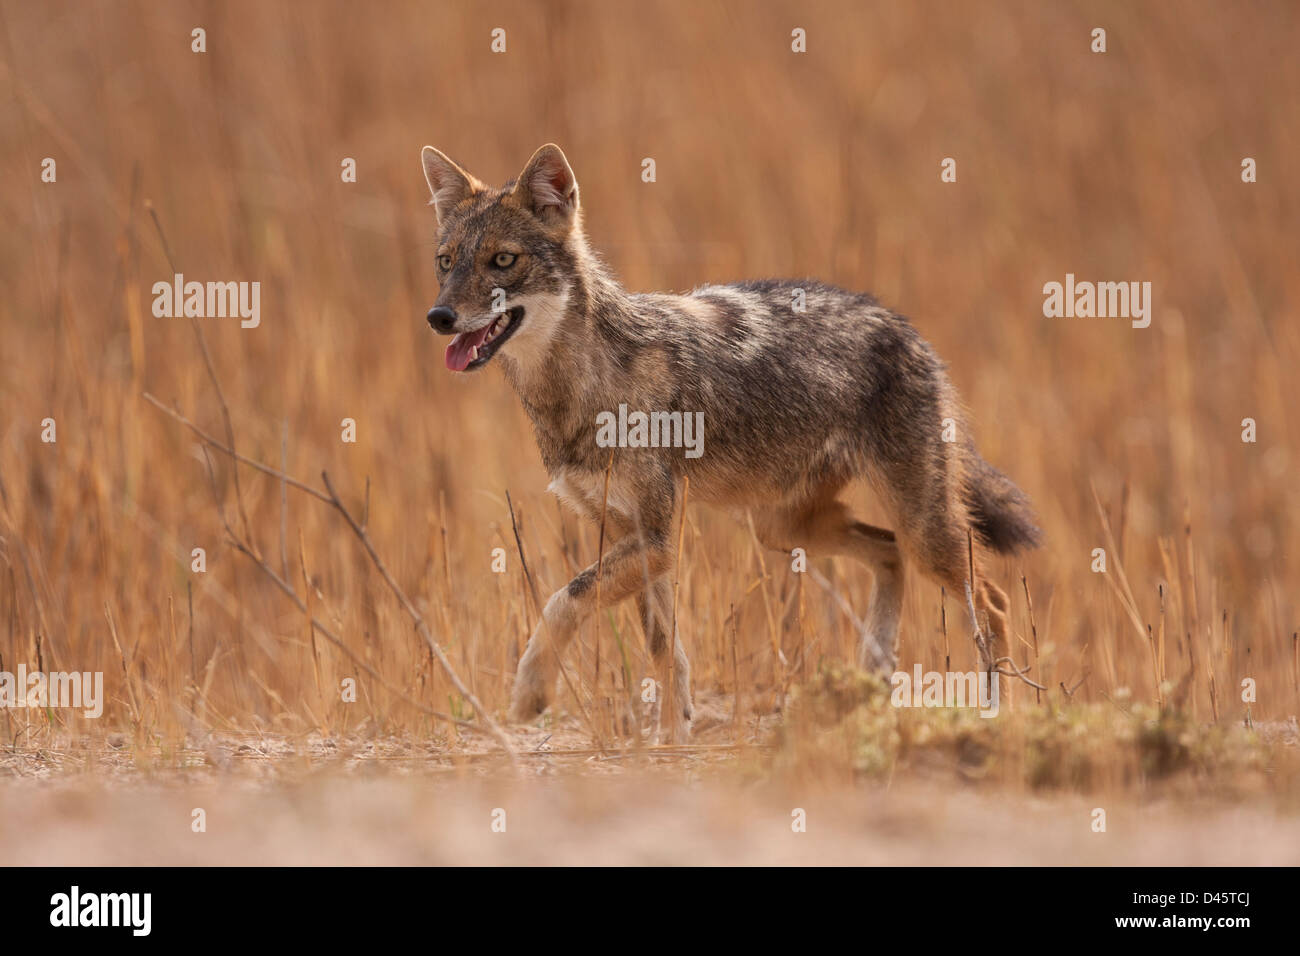 The jackal in a grassland moving intently towards its prey in Bandhavgarh Tiger Reserve, India Stock Photo